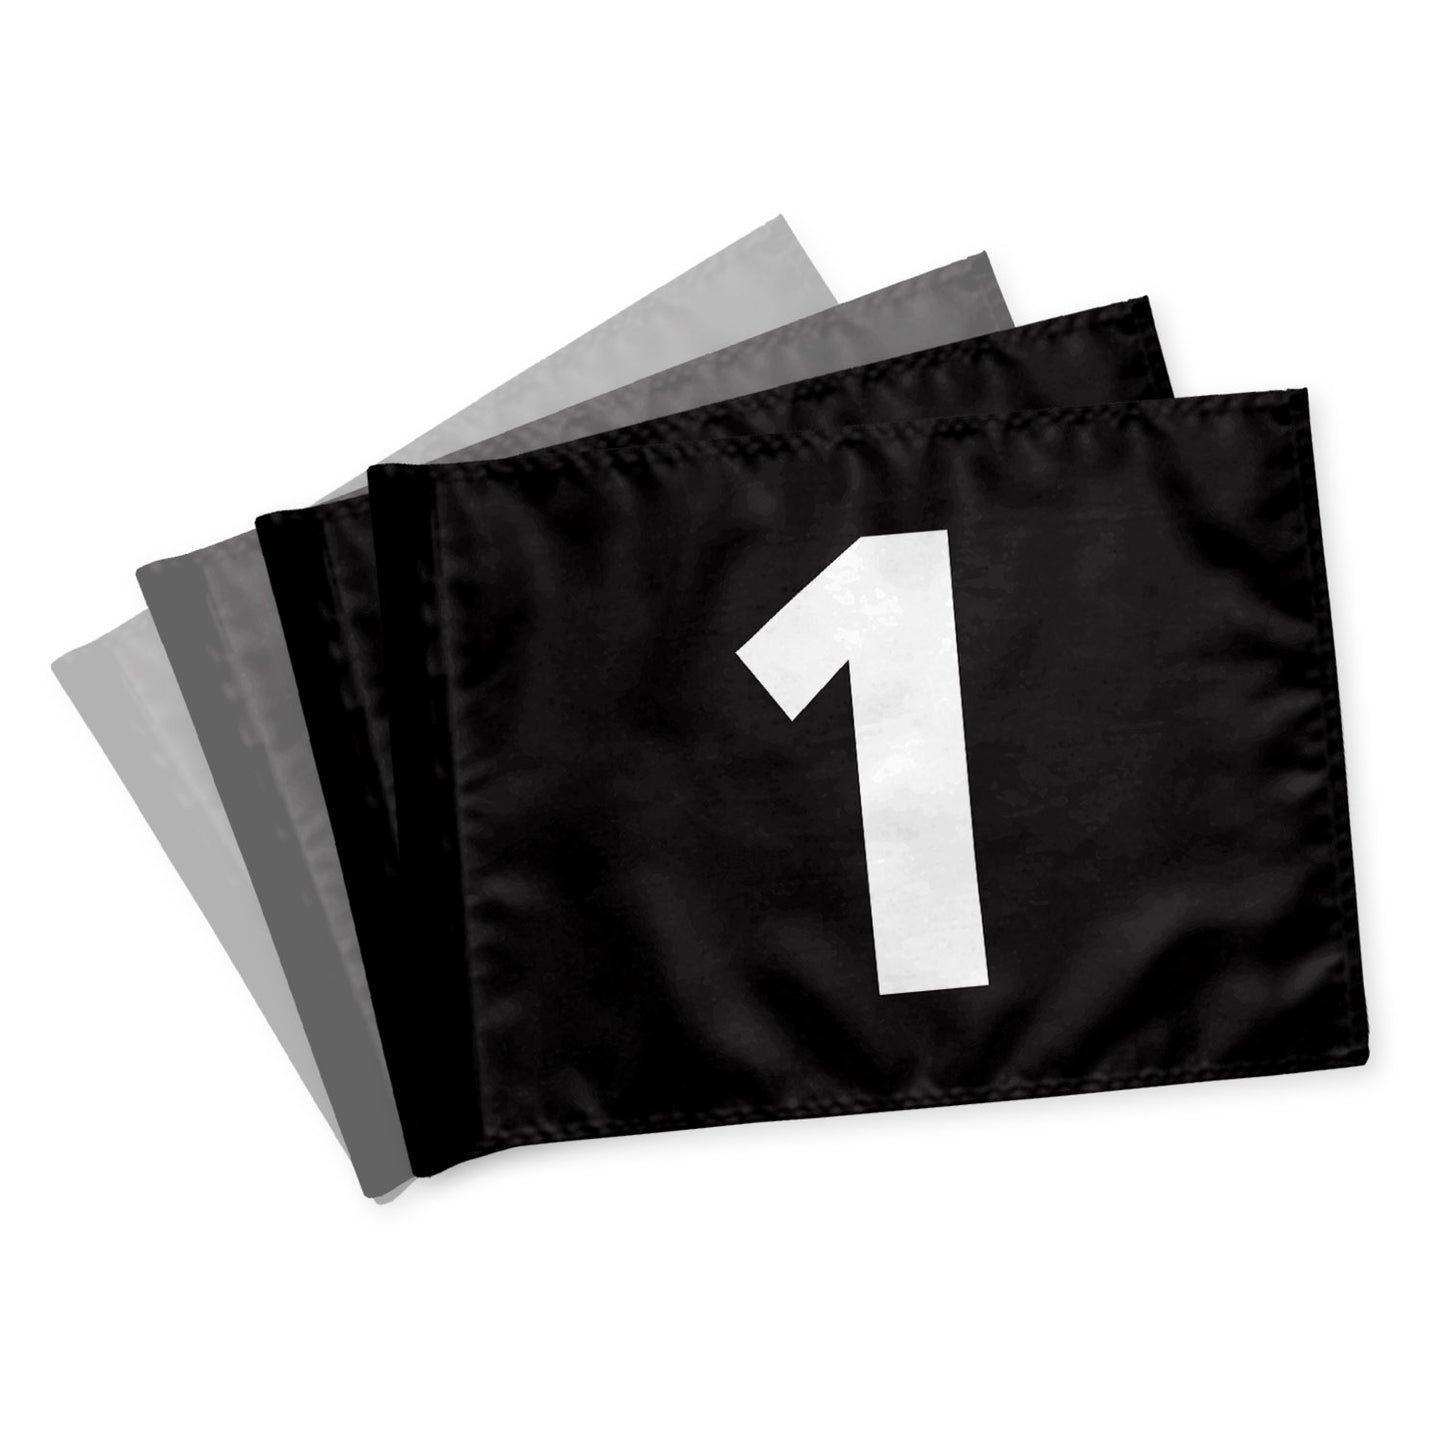 Puttinggreenflags 1-9, black with white numbers, 200 gram fabric